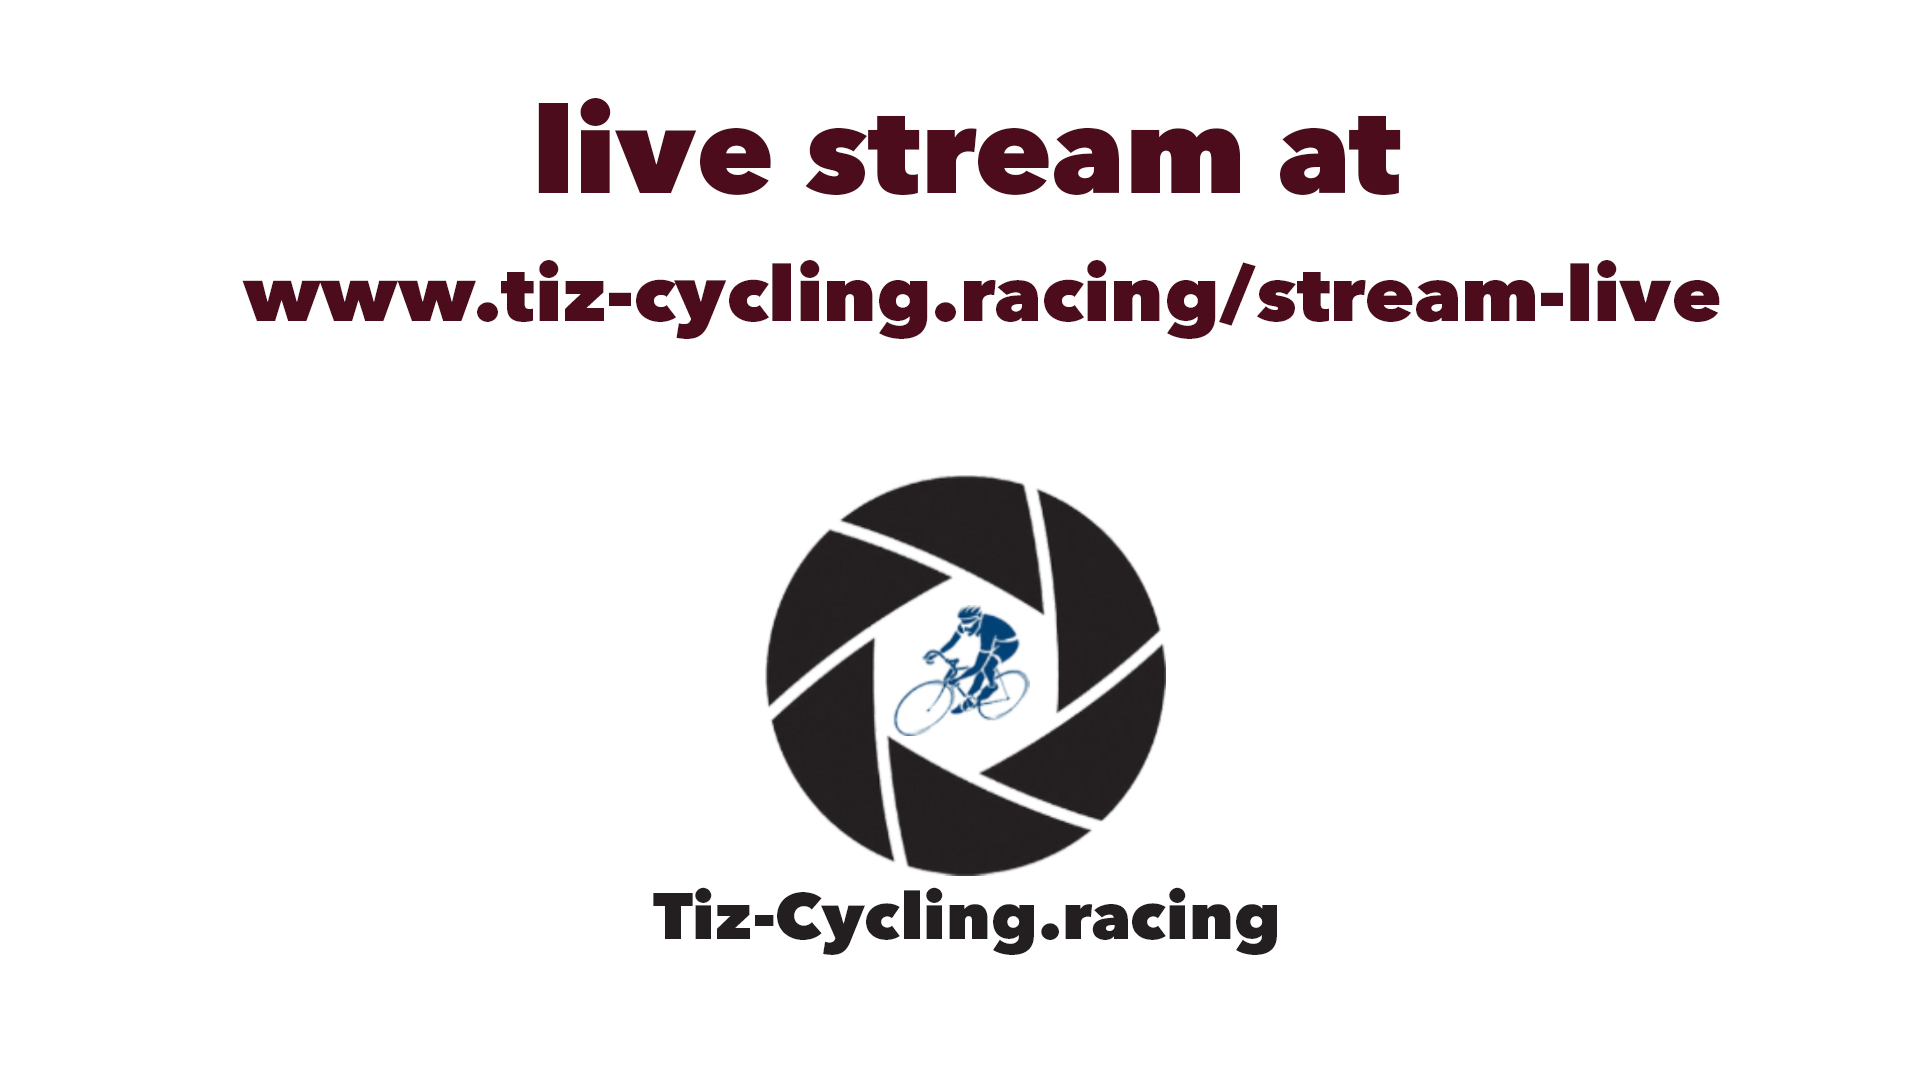 tiz cycling racing live stream today